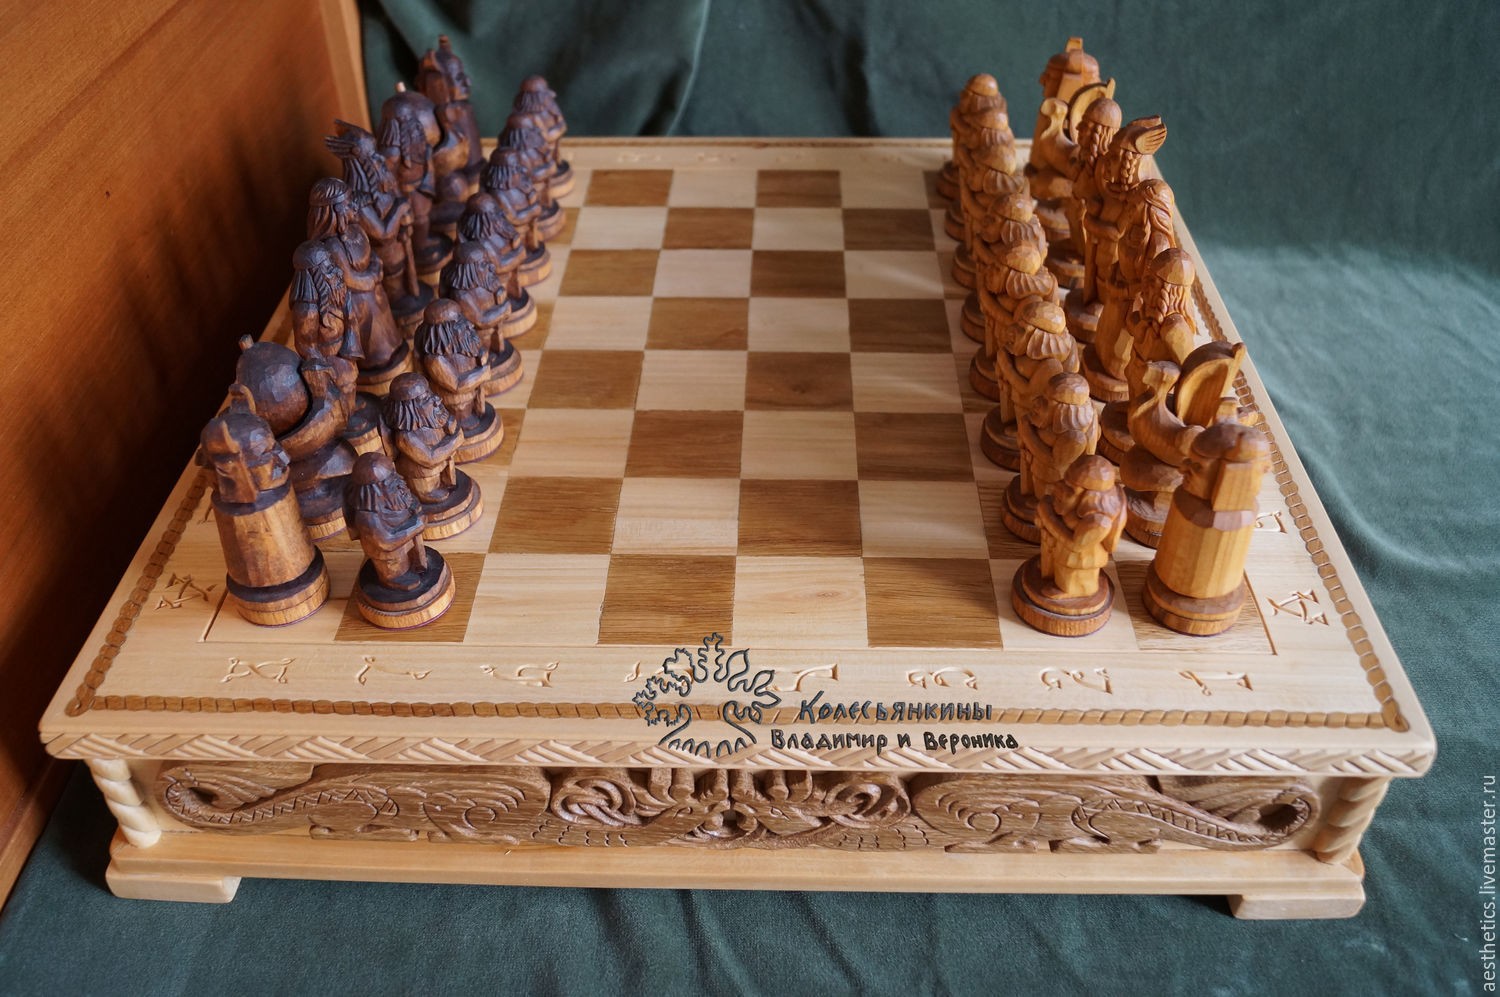 Papercraft Chess Chess and Table Vikings – Shop Online On Livemaster with Shipping